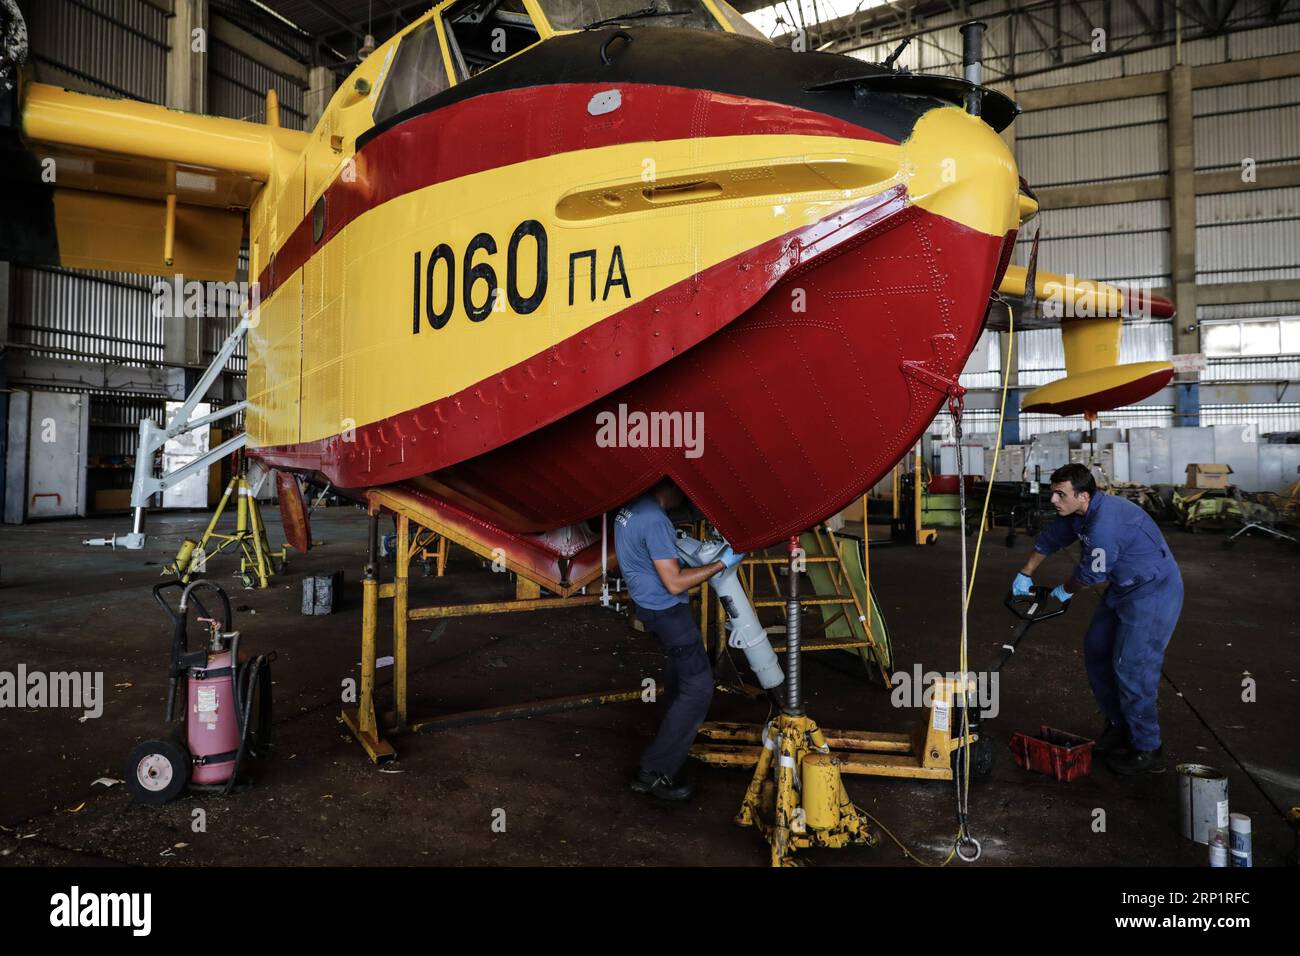 (180721) -- ATHENS, July 21, 2018 -- Engineers of Canadair firefighting aircraft fix an aircraft at Elefsina Air Base, Athens, Greece, on July 20, 2018. The 355 Tactical Transport Squadron was established in 1947 to fight wildfires. ) (zcc) GREECE-ATHENS-FIREFIGHTING SQUADRON LefterisxPartsalis PUBLICATIONxNOTxINxCHN Stock Photo